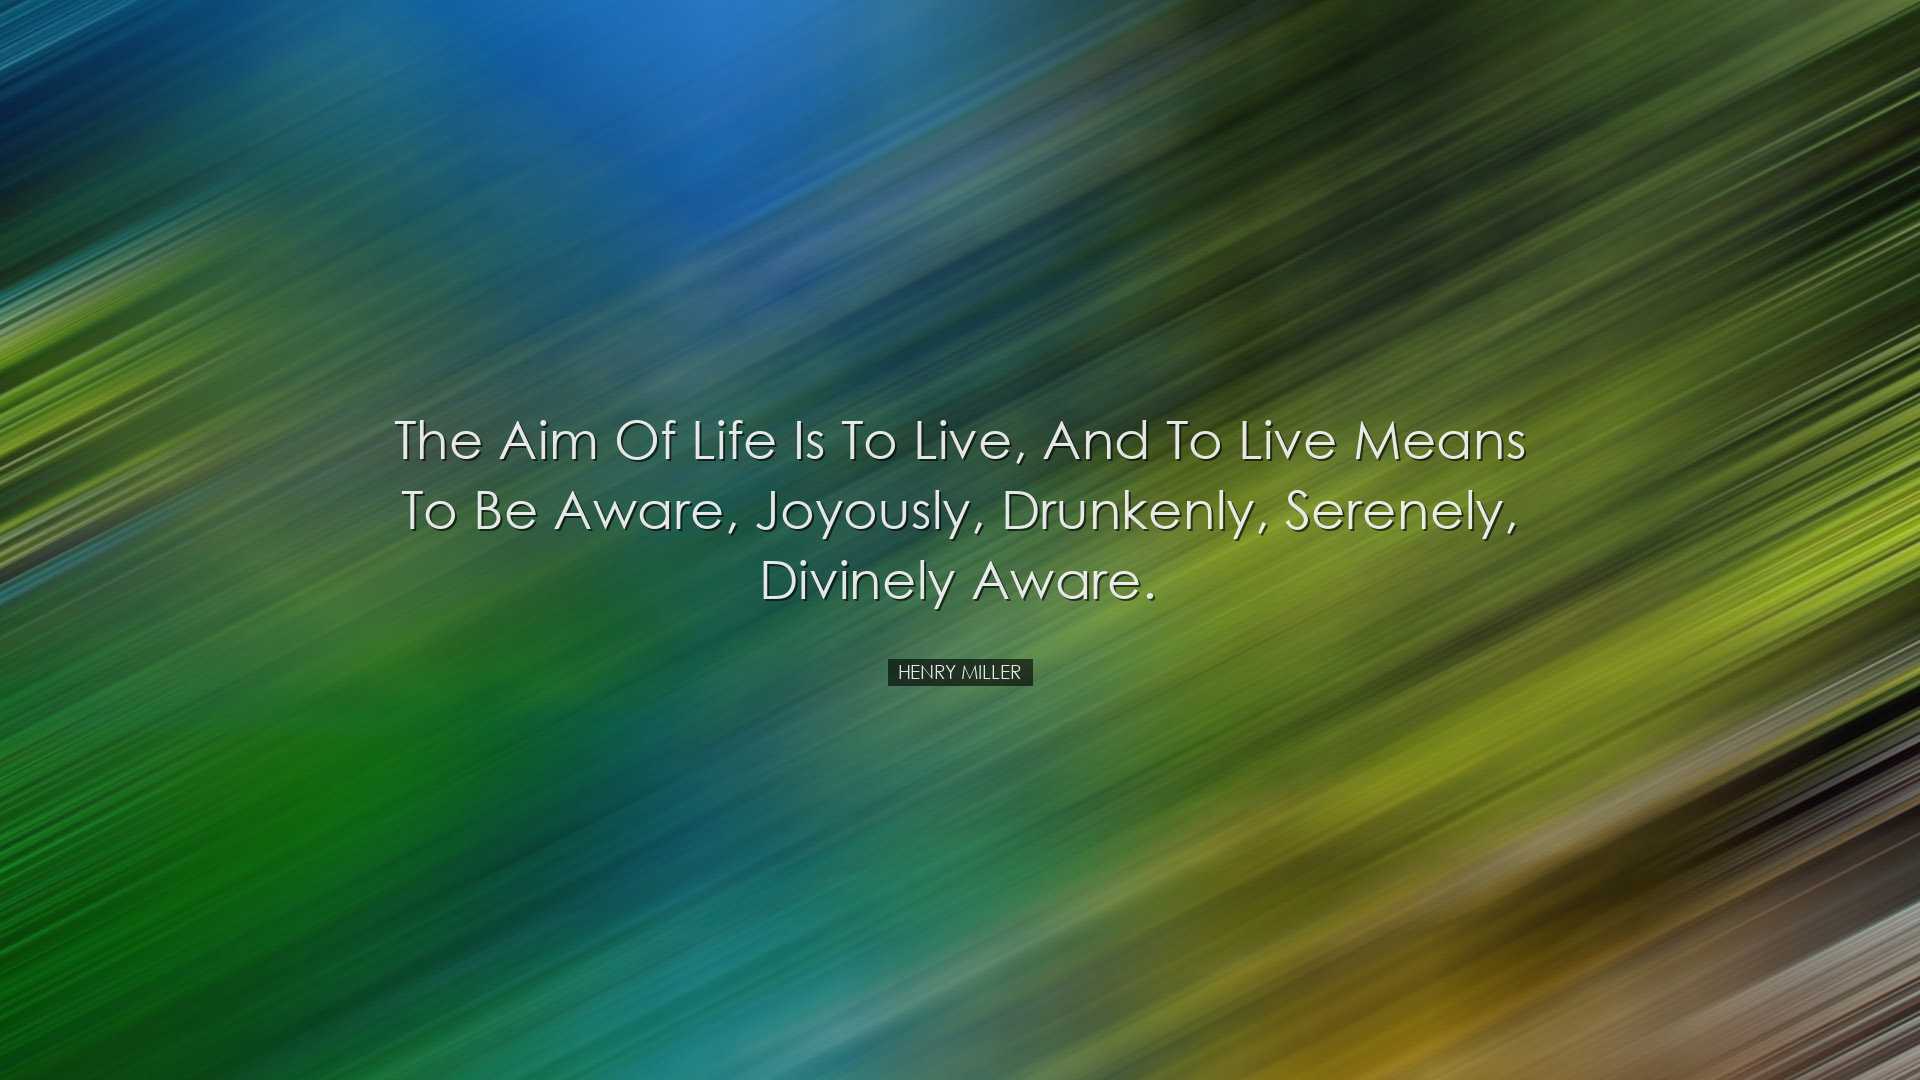 The aim of life is to live, and to live means to be aware, joyousl